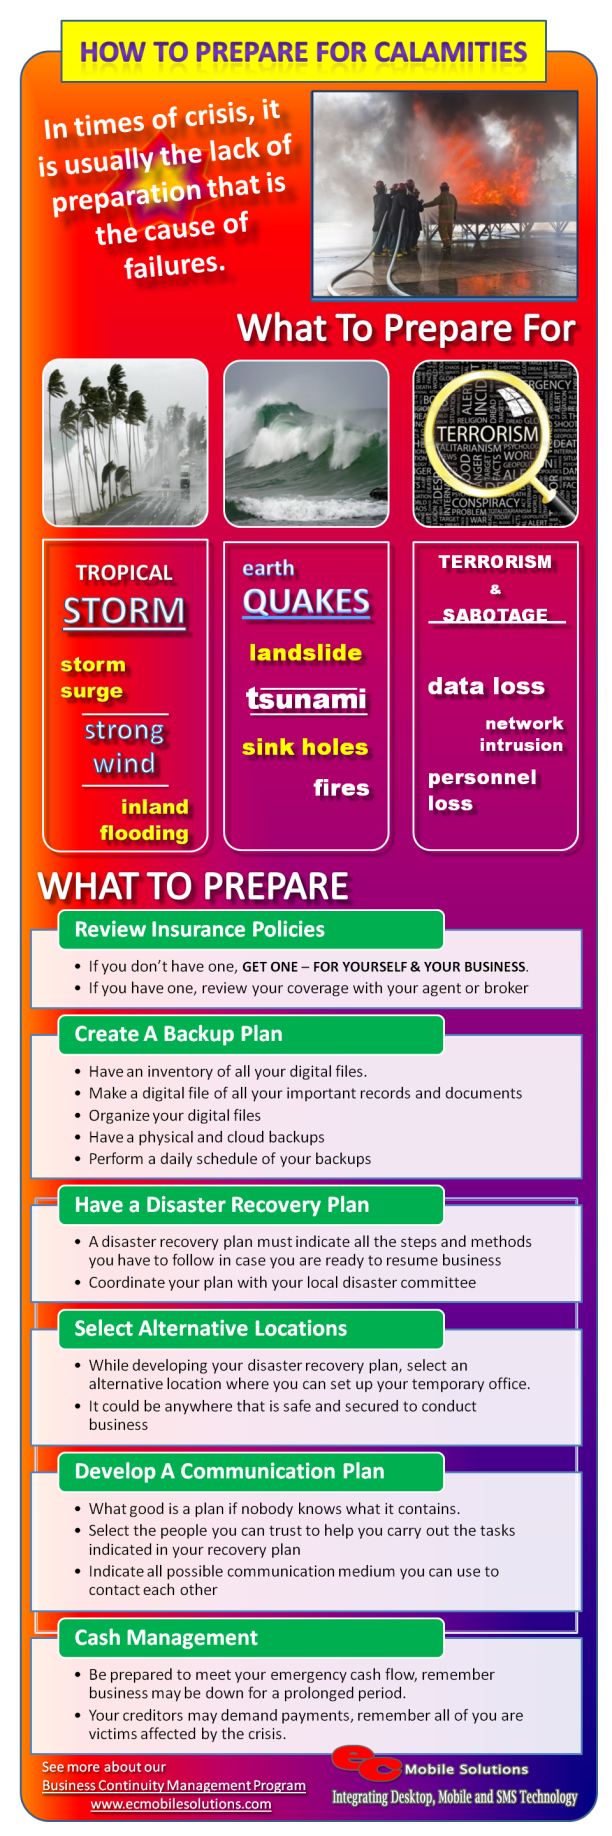 Infographic-how-to-prepare-for-calamities